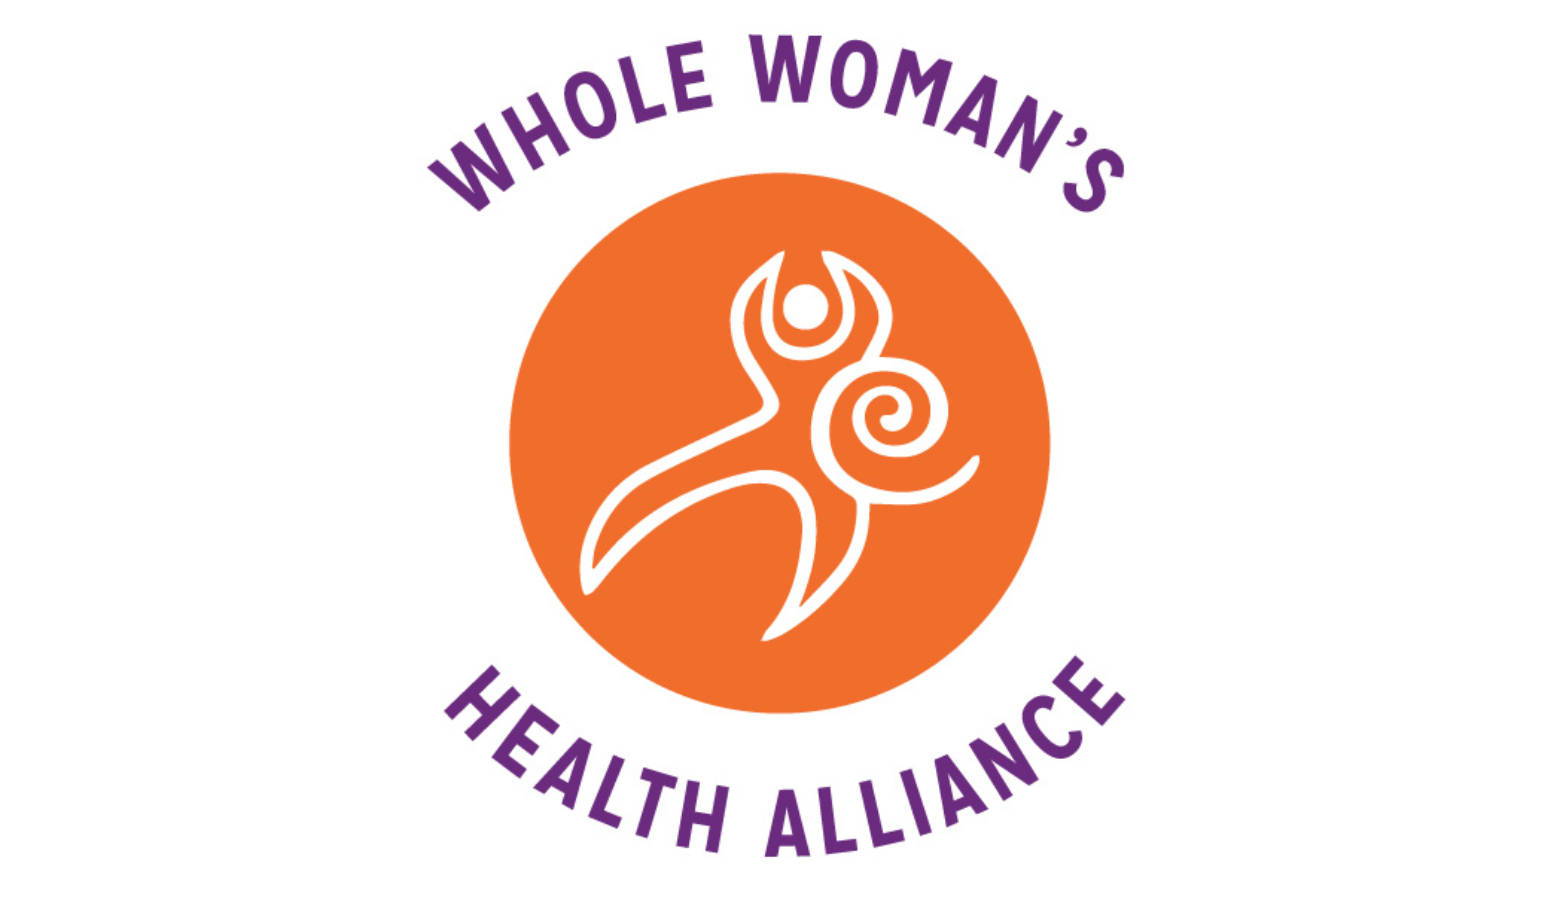 A South Bend abortion clinic’s bid to secure a license from the state may turn on its connection to other abortion clinics around the country. (Whole Woman's Health Alliance)